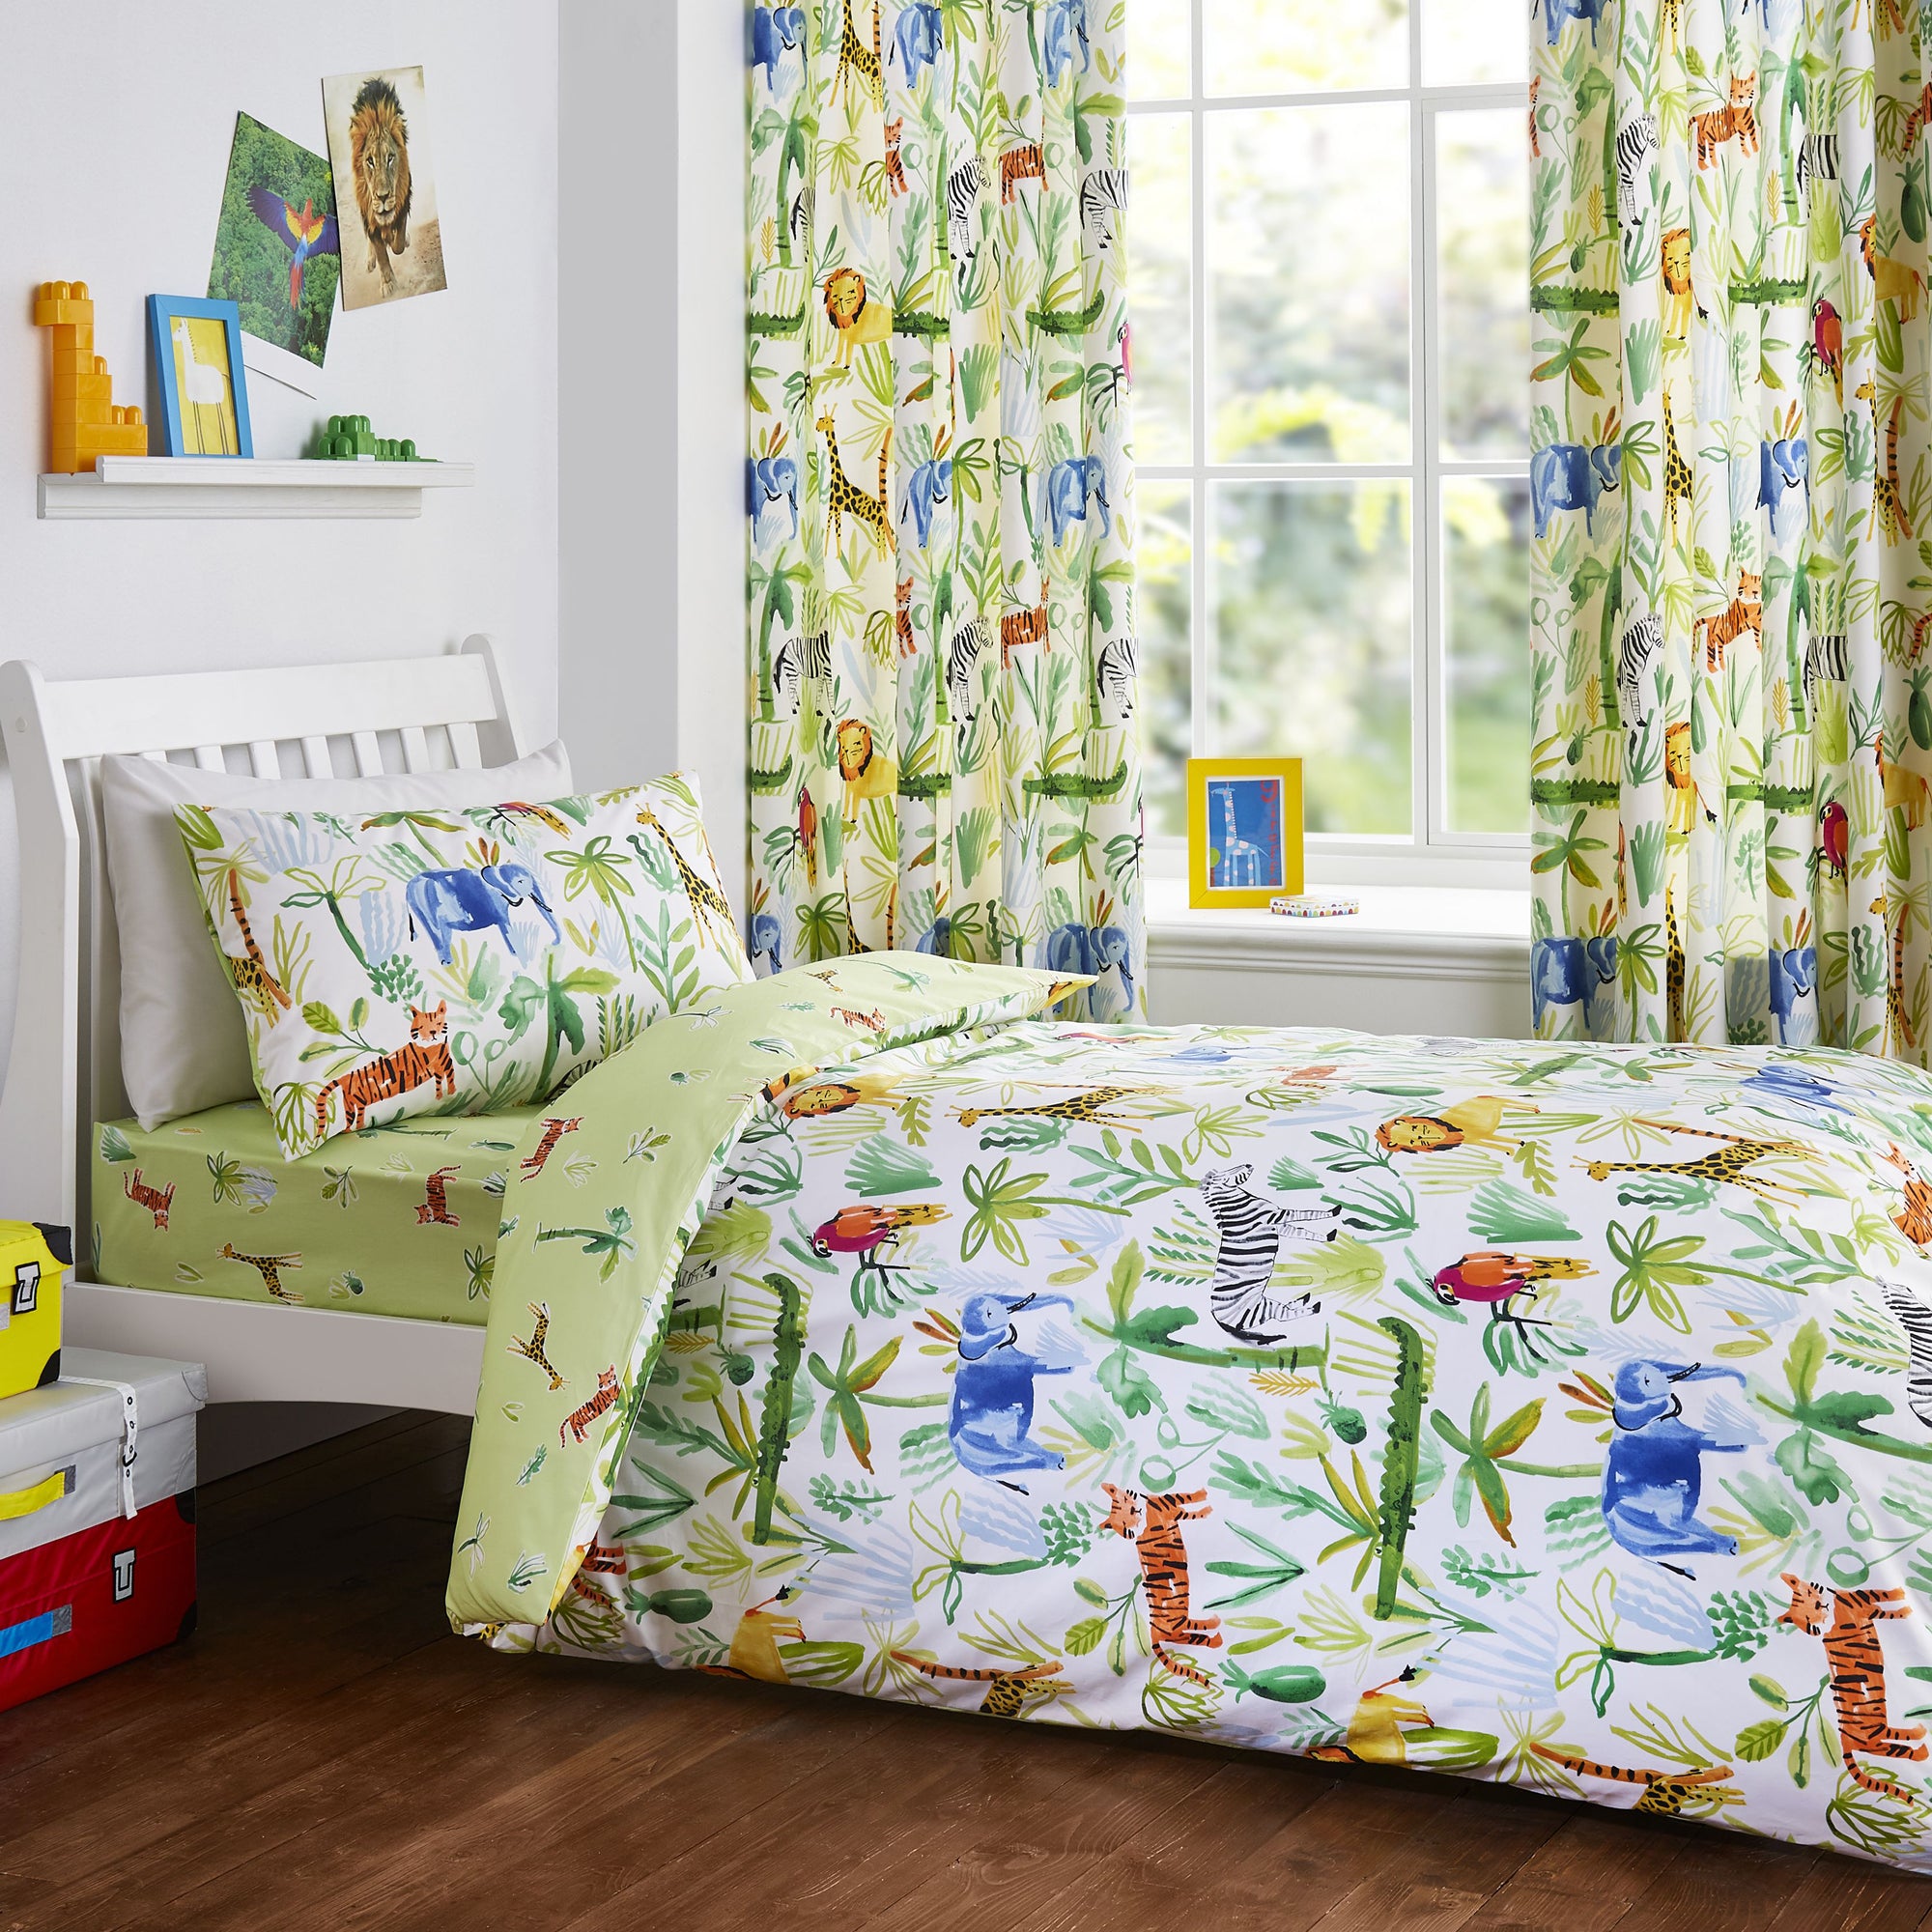 Jungle - Children's Duvet Cover Set, Curtains & Fitted Sheets - by Bedlam